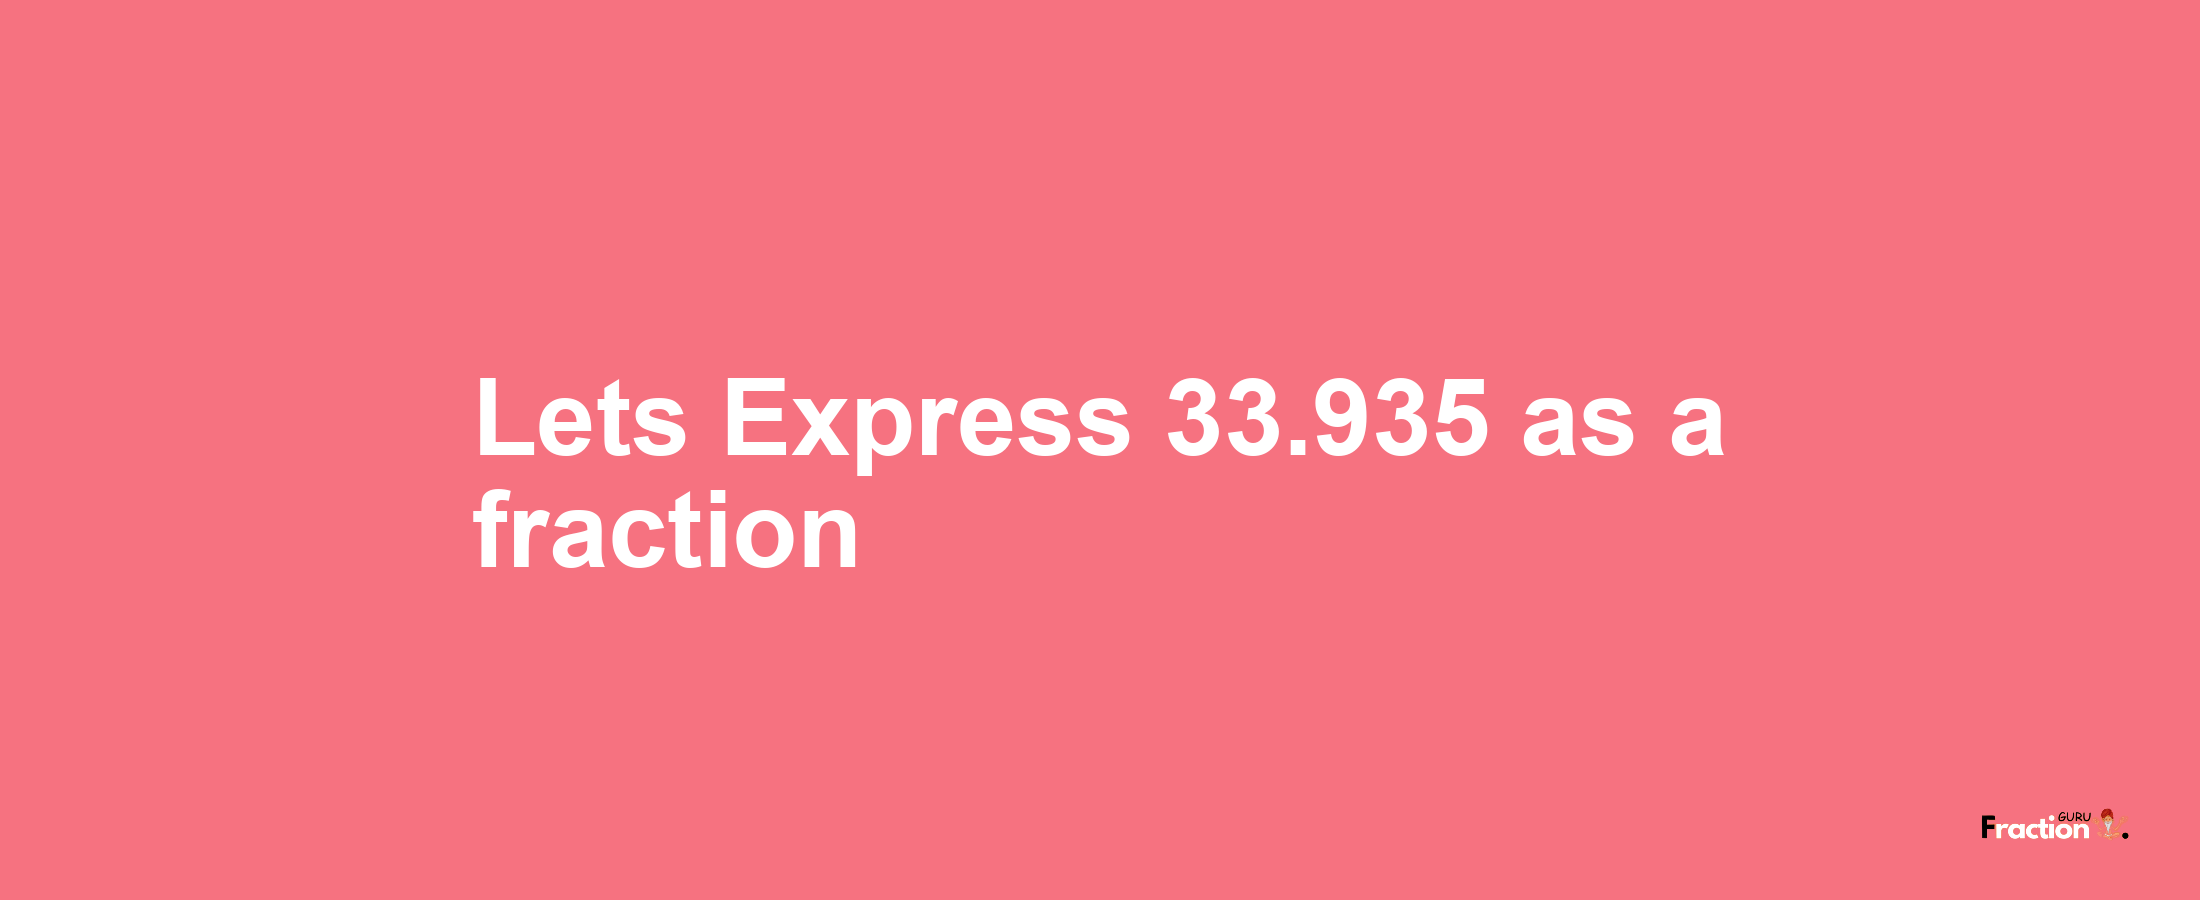 Lets Express 33.935 as afraction